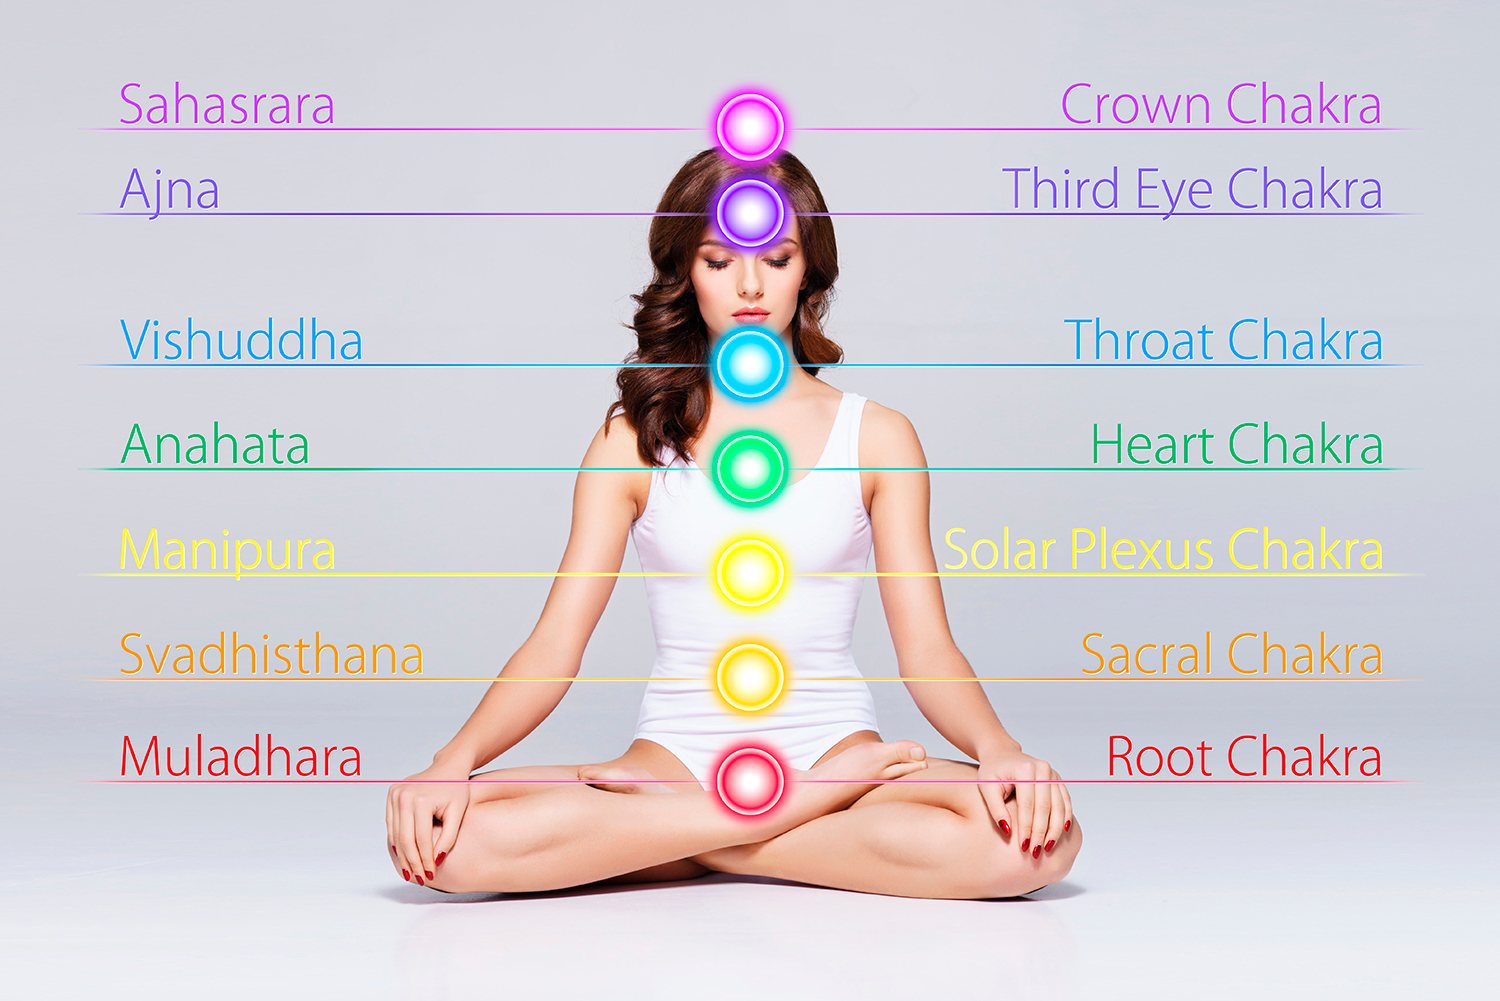 Overview of Chakras